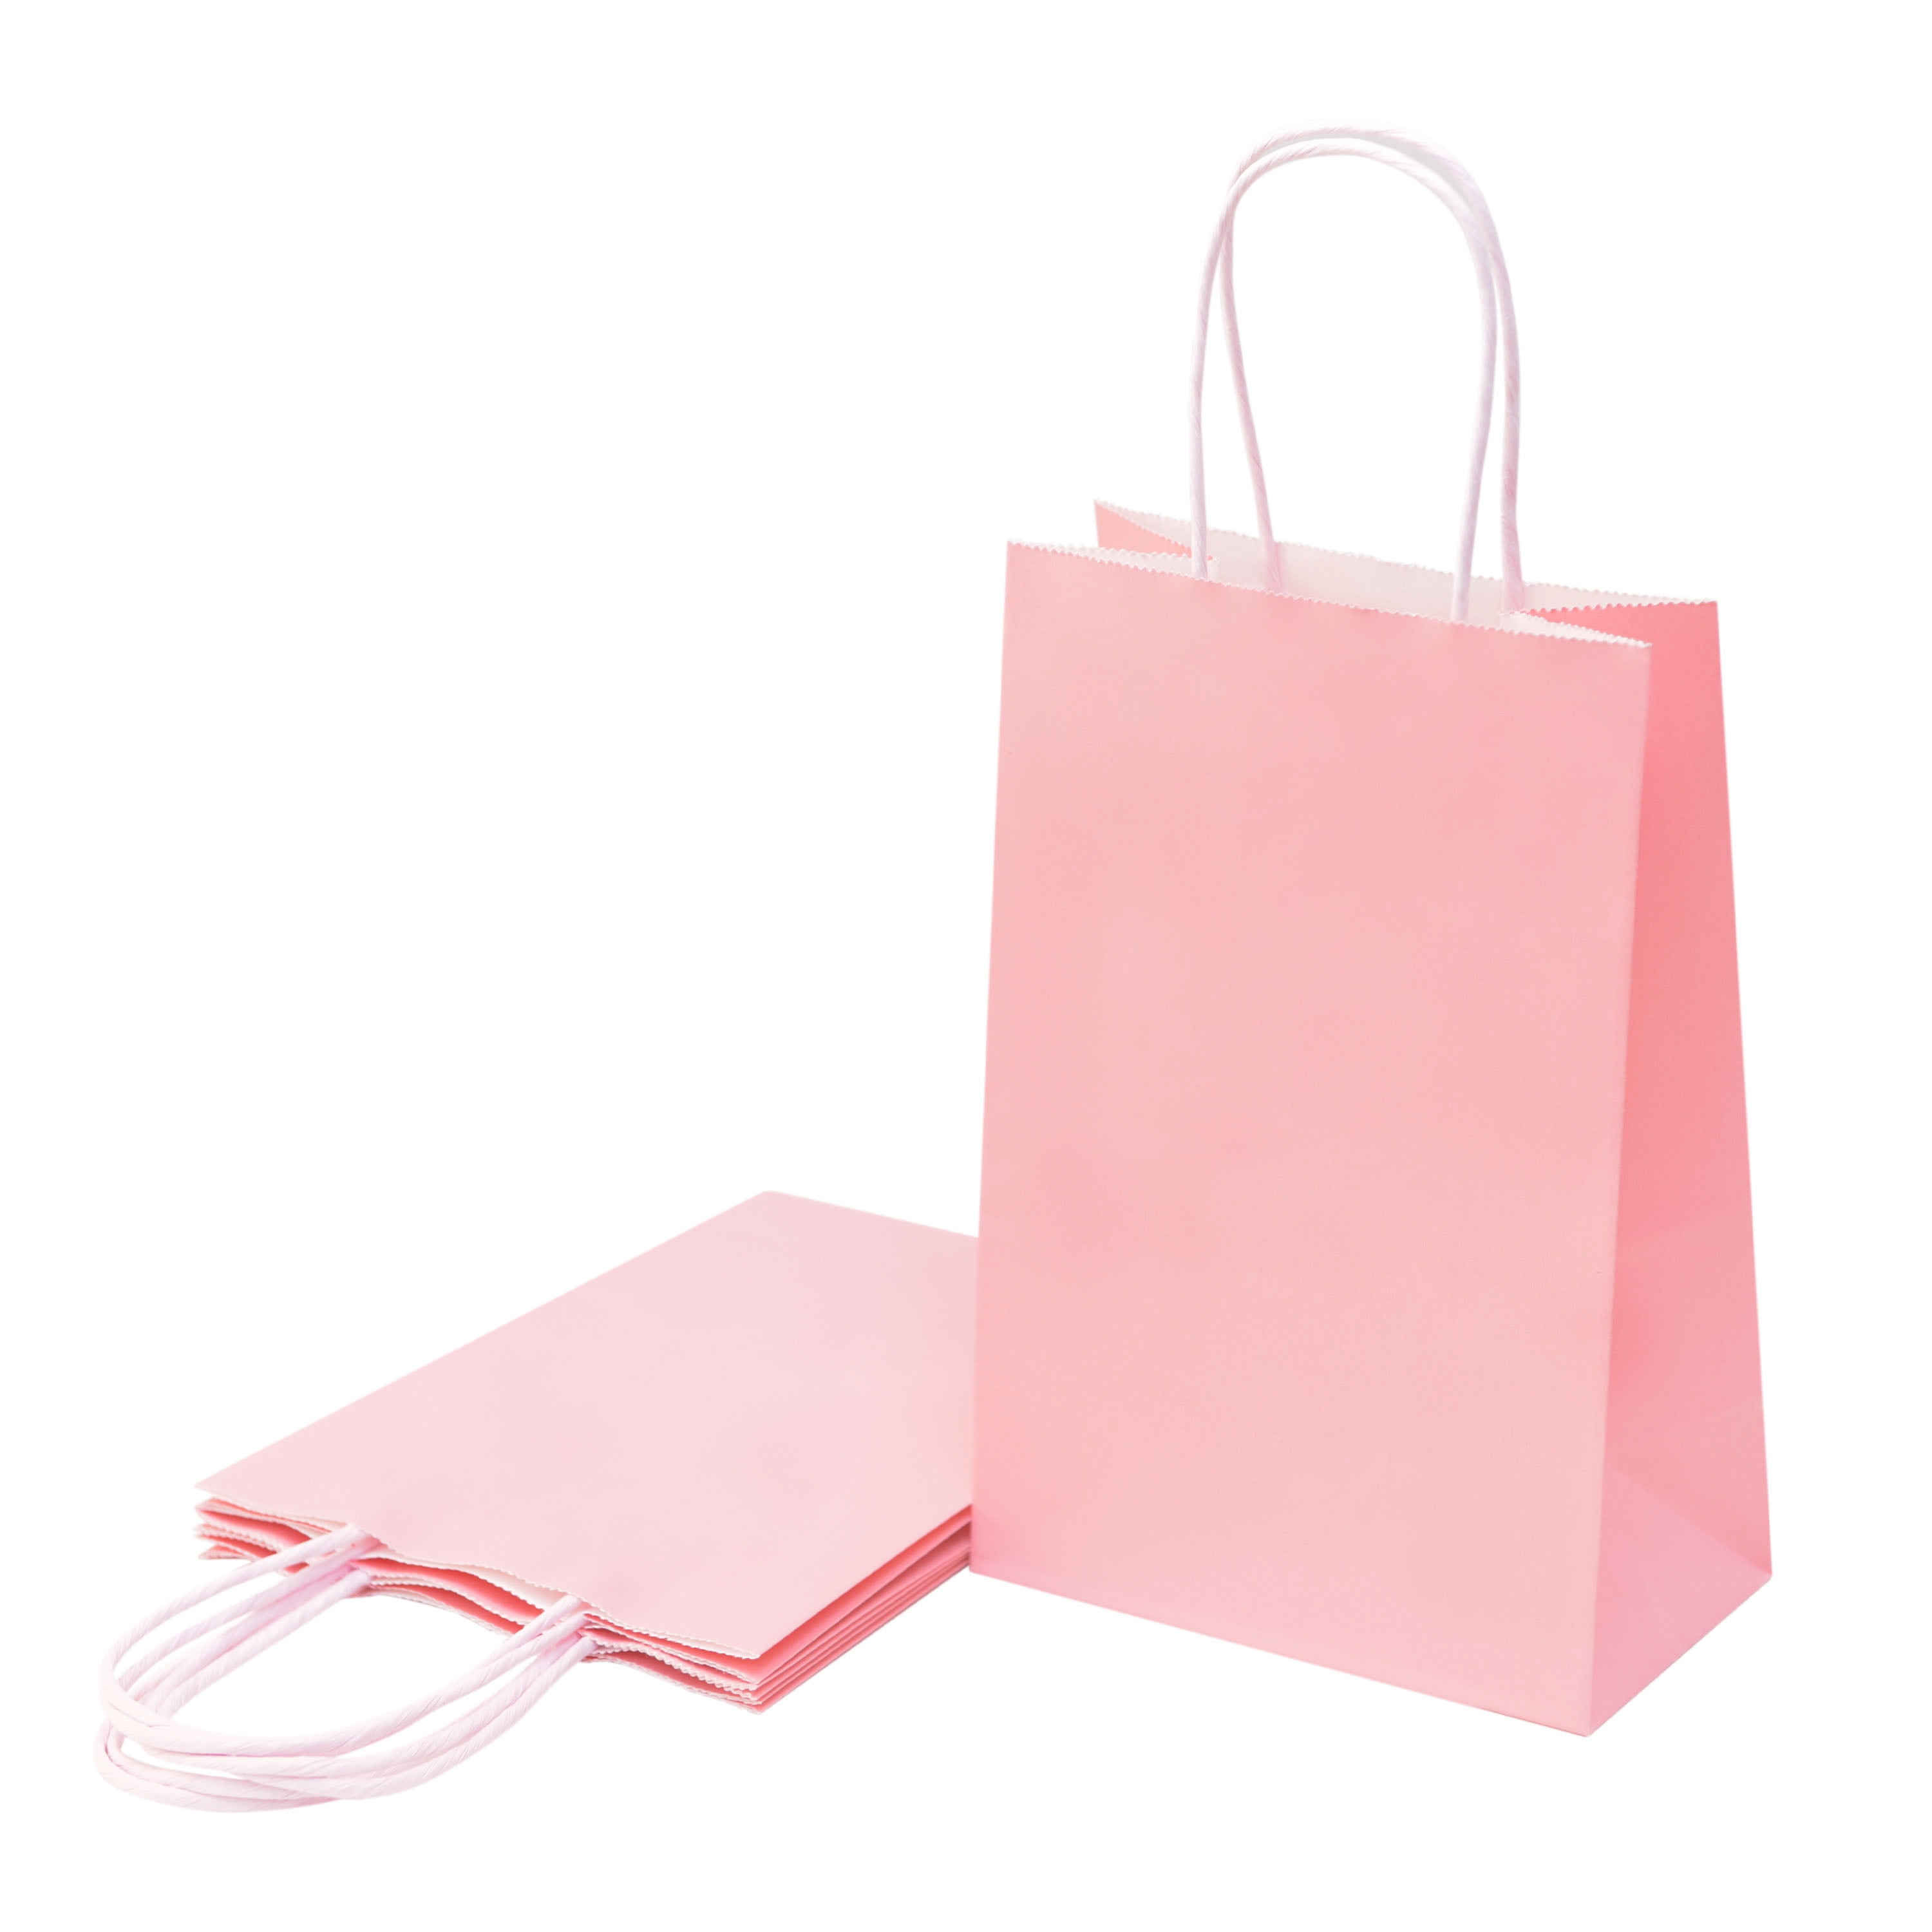 Pink Gift Bags Medium Size 12 Pack. Paper Gift Bags with Handles for  Birthdays, Shower, Wedding, Shopping, Events, Treats, Business Tchotchkes,  Retail, Bakery & Presents. 